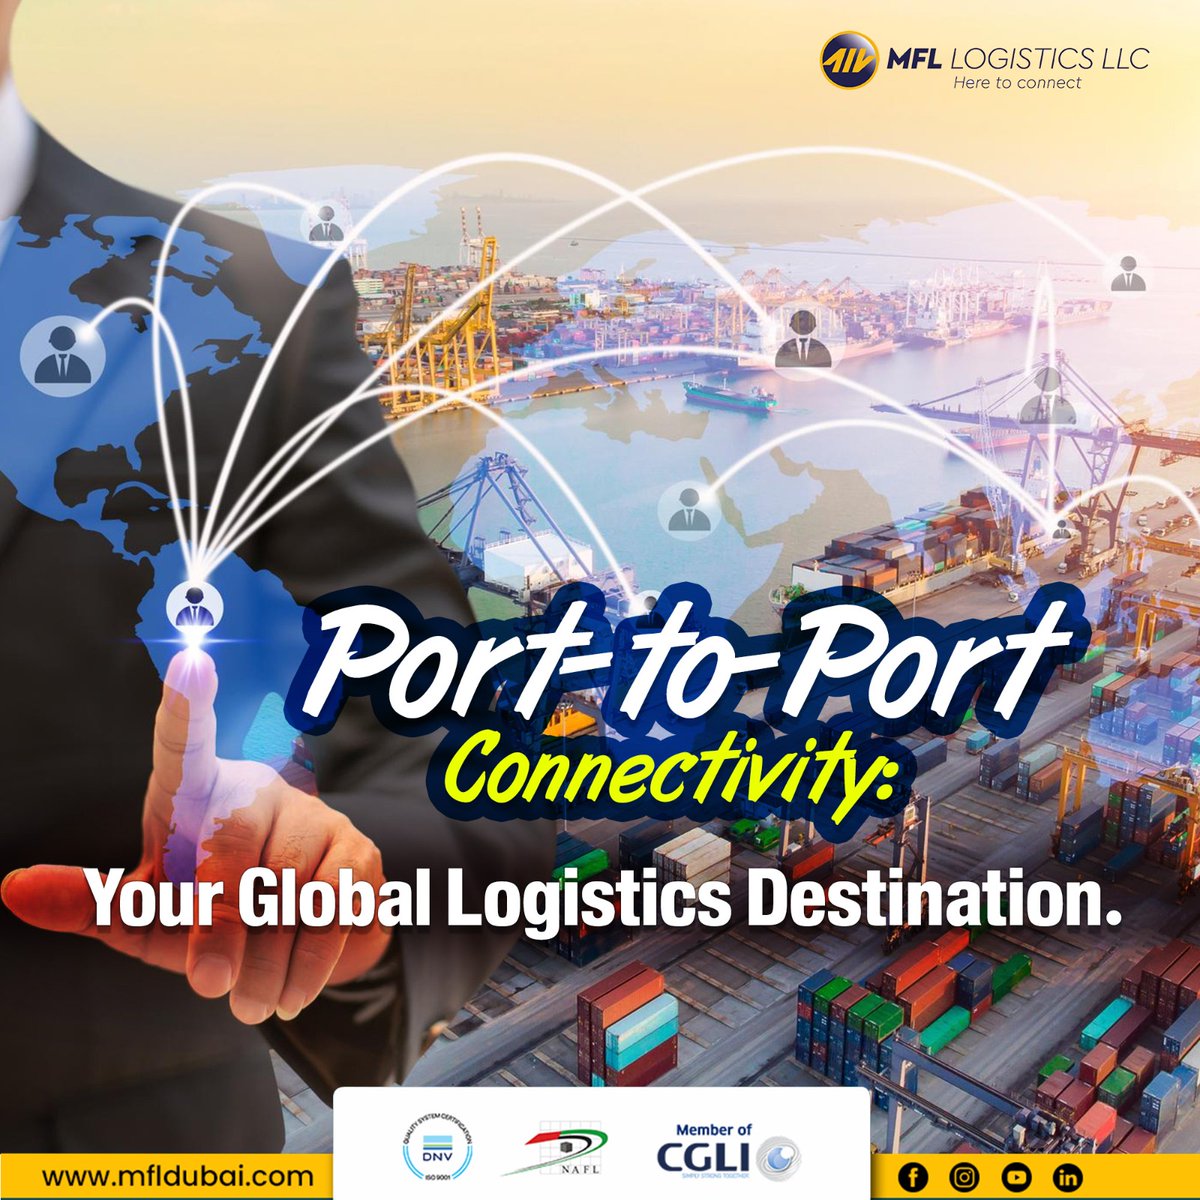 𝐌𝐅𝐋 𝐋𝐨𝐠𝐢𝐬𝐭𝐢𝐜𝐬 𝐋𝐋𝐂 - Your Gateway to Seamless Port-to-Port Logistics! Navigating oceans, connecting global ports, and delivering excellence with precision. 

#mfldubai #porttoport #seaport #logistics  #logisticsservices #greenwichmeridianlogistics